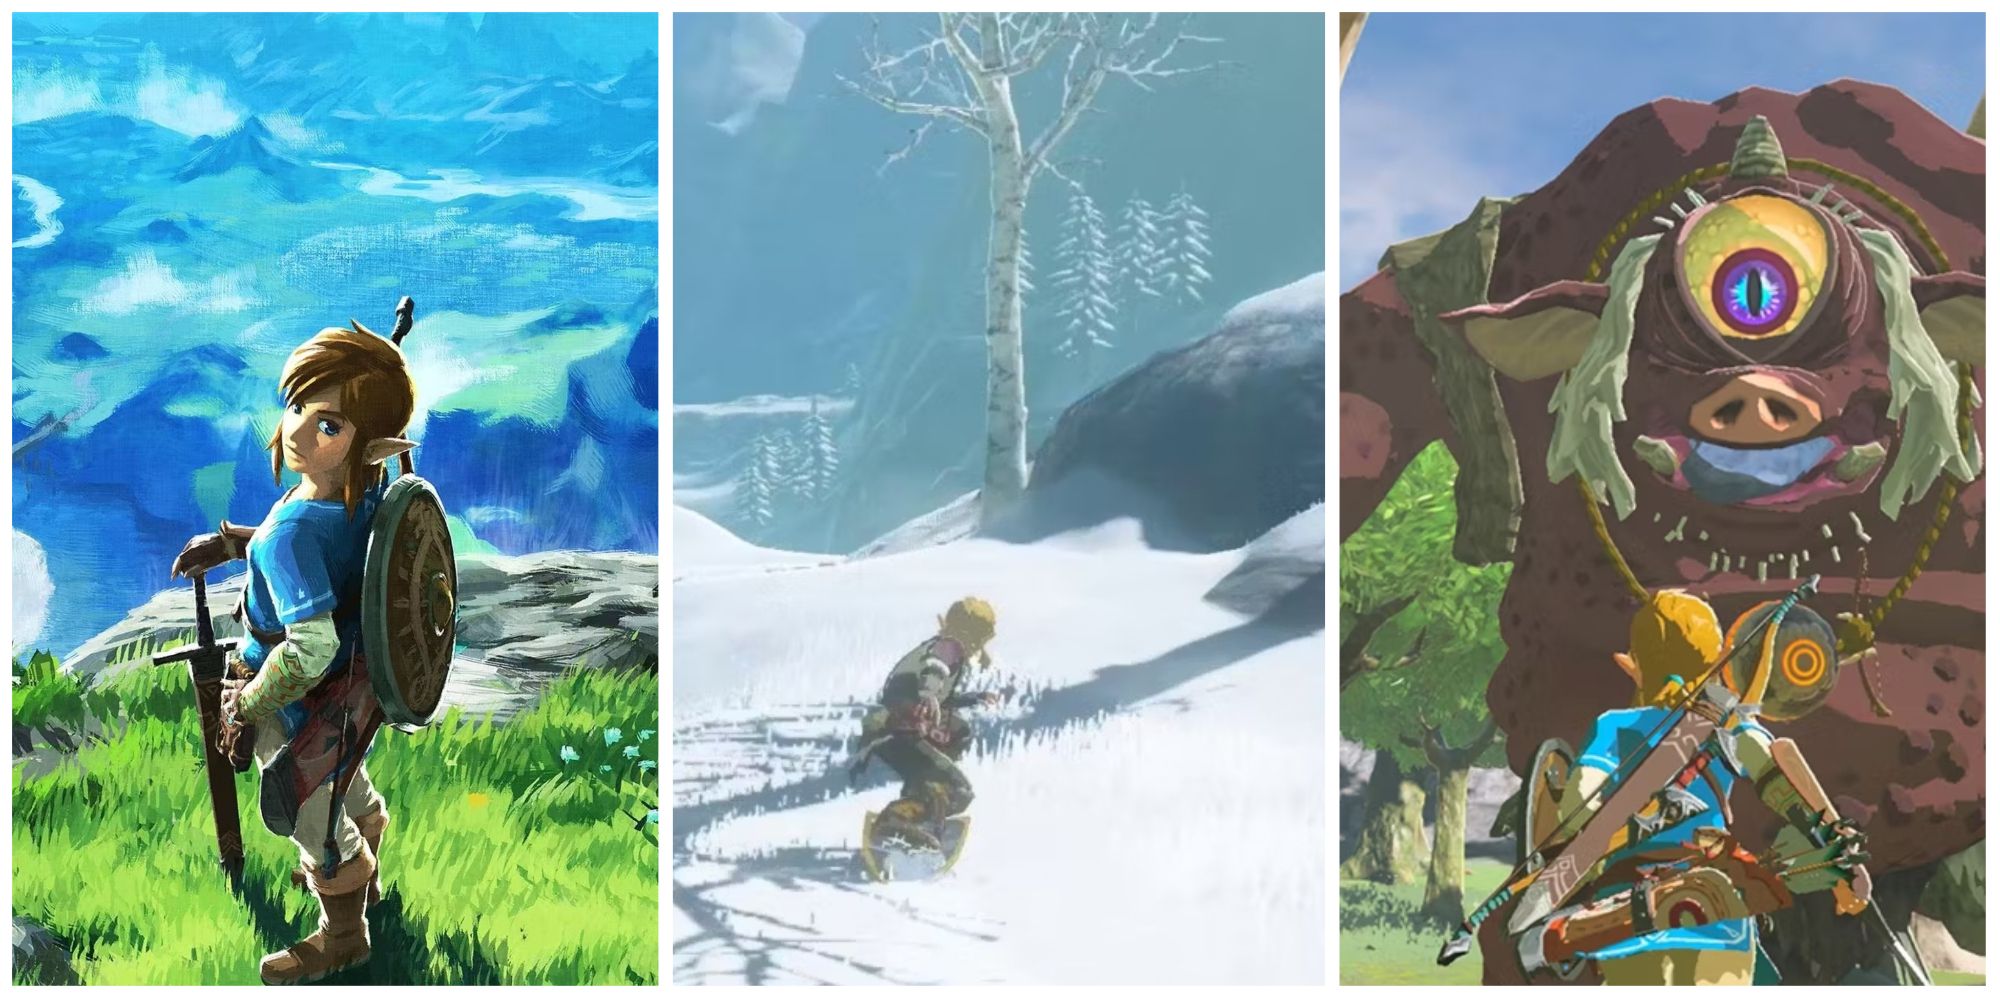 Left: Link standing on the Great Plateau. Middle: Link shield surfing down a snowy hill. Right. Link, with his back to the camera, looks up at a Hinox.